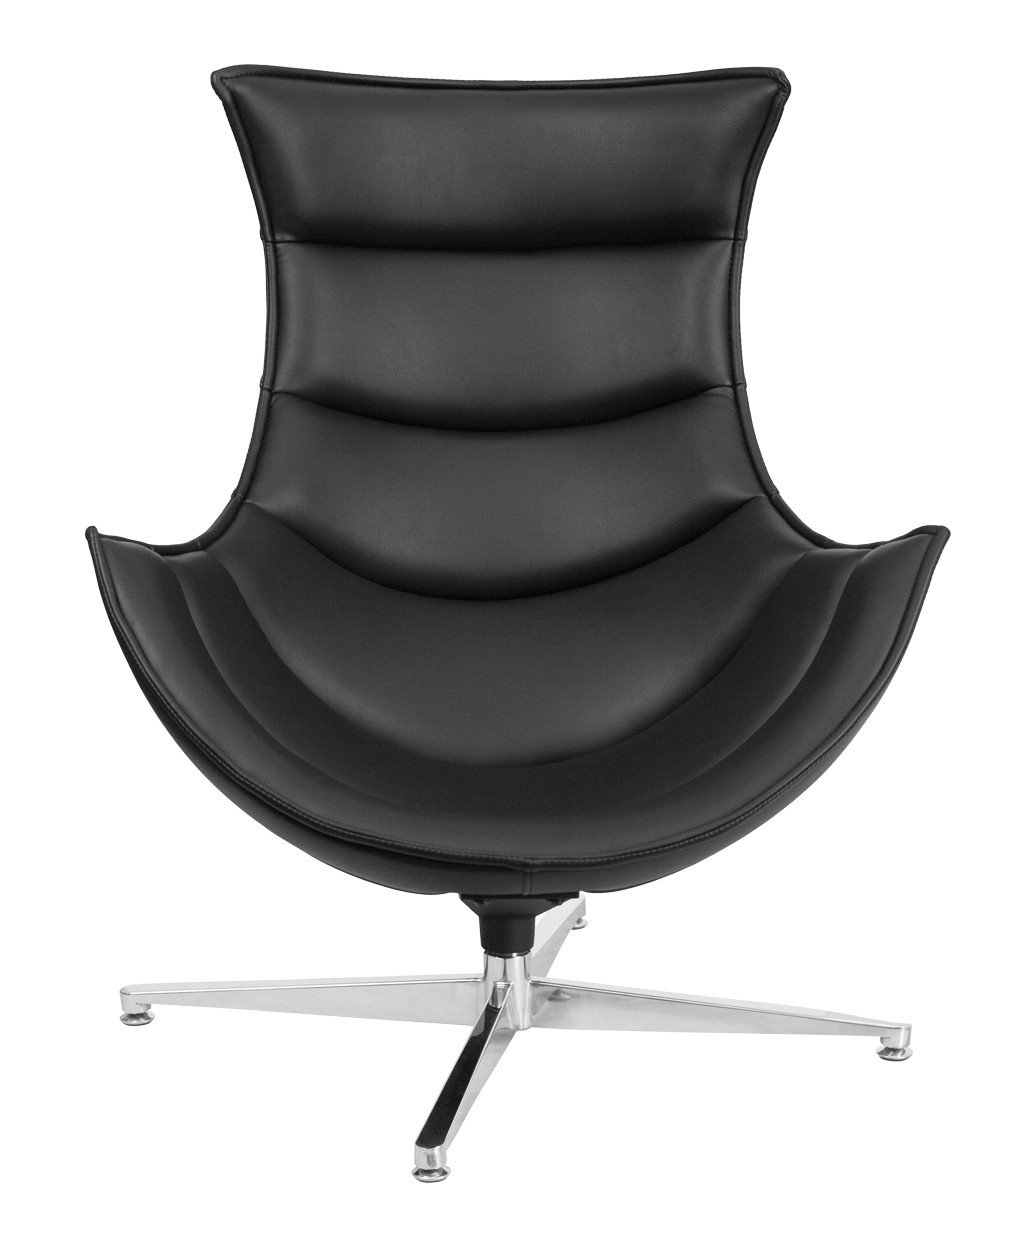 Black Leather Swivel Cocoon Chair